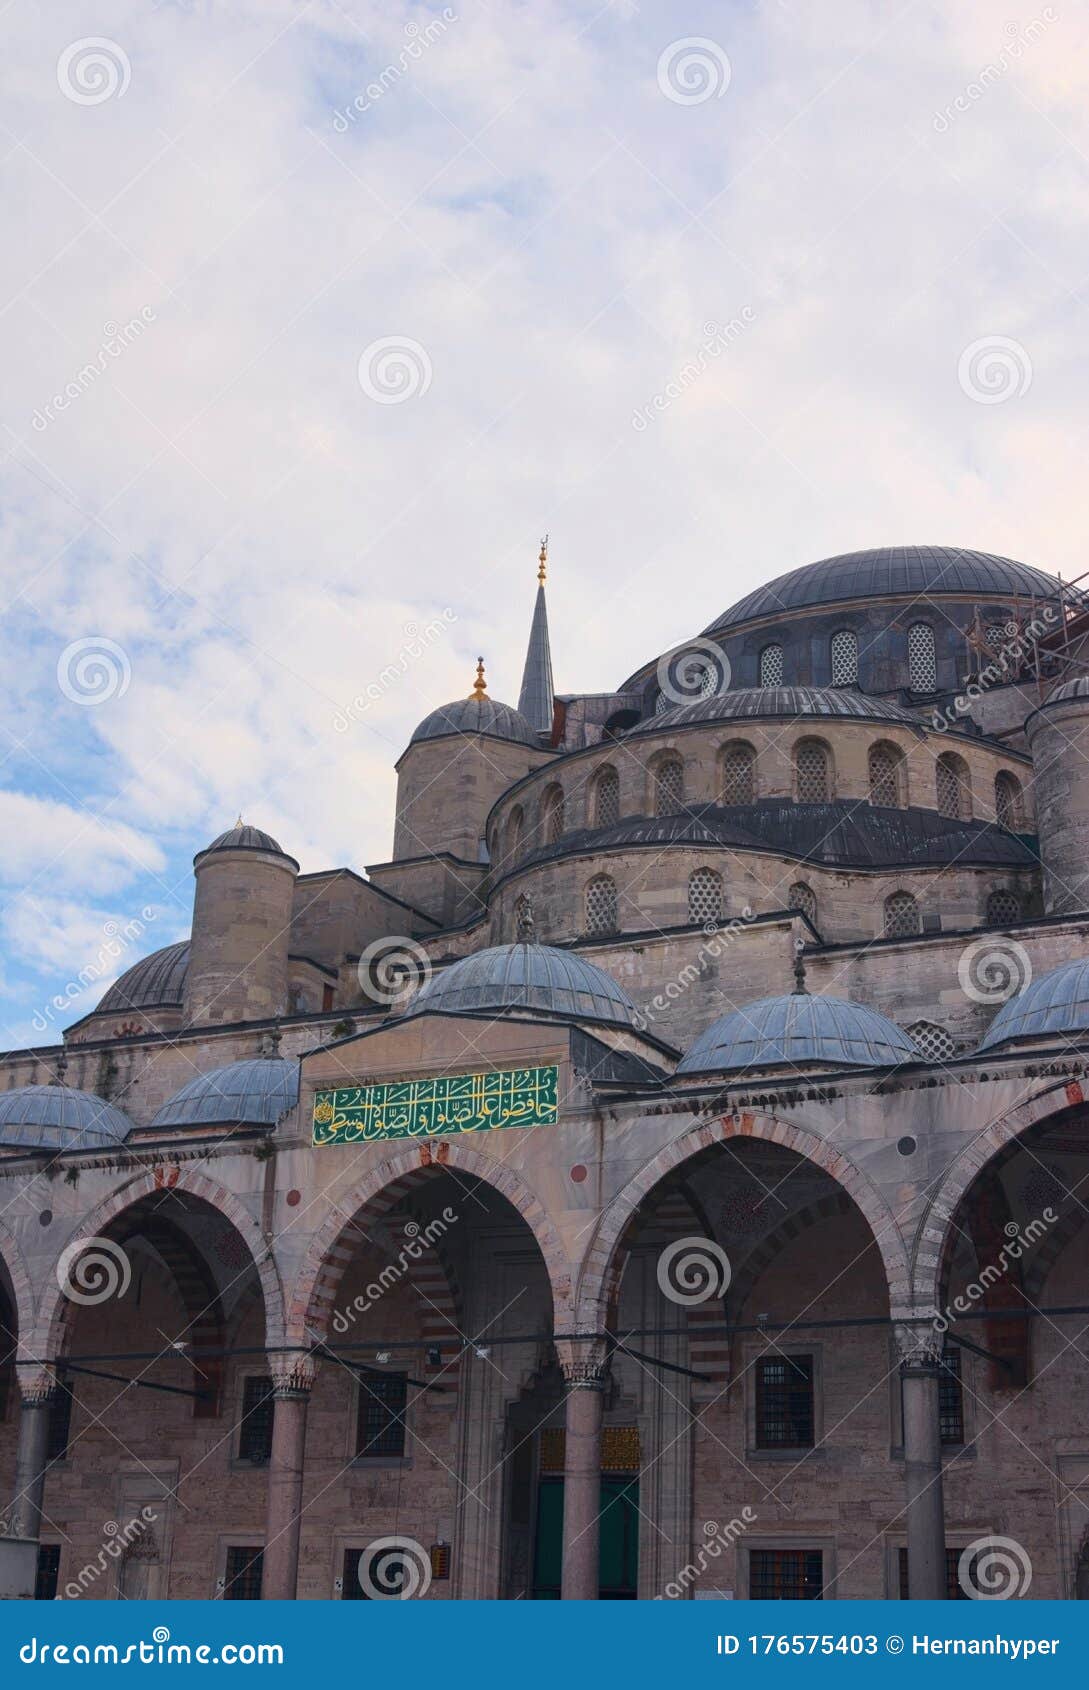 architectural detail of the blue mosque of sultanahmed, in istanbul, turkey. low angle view